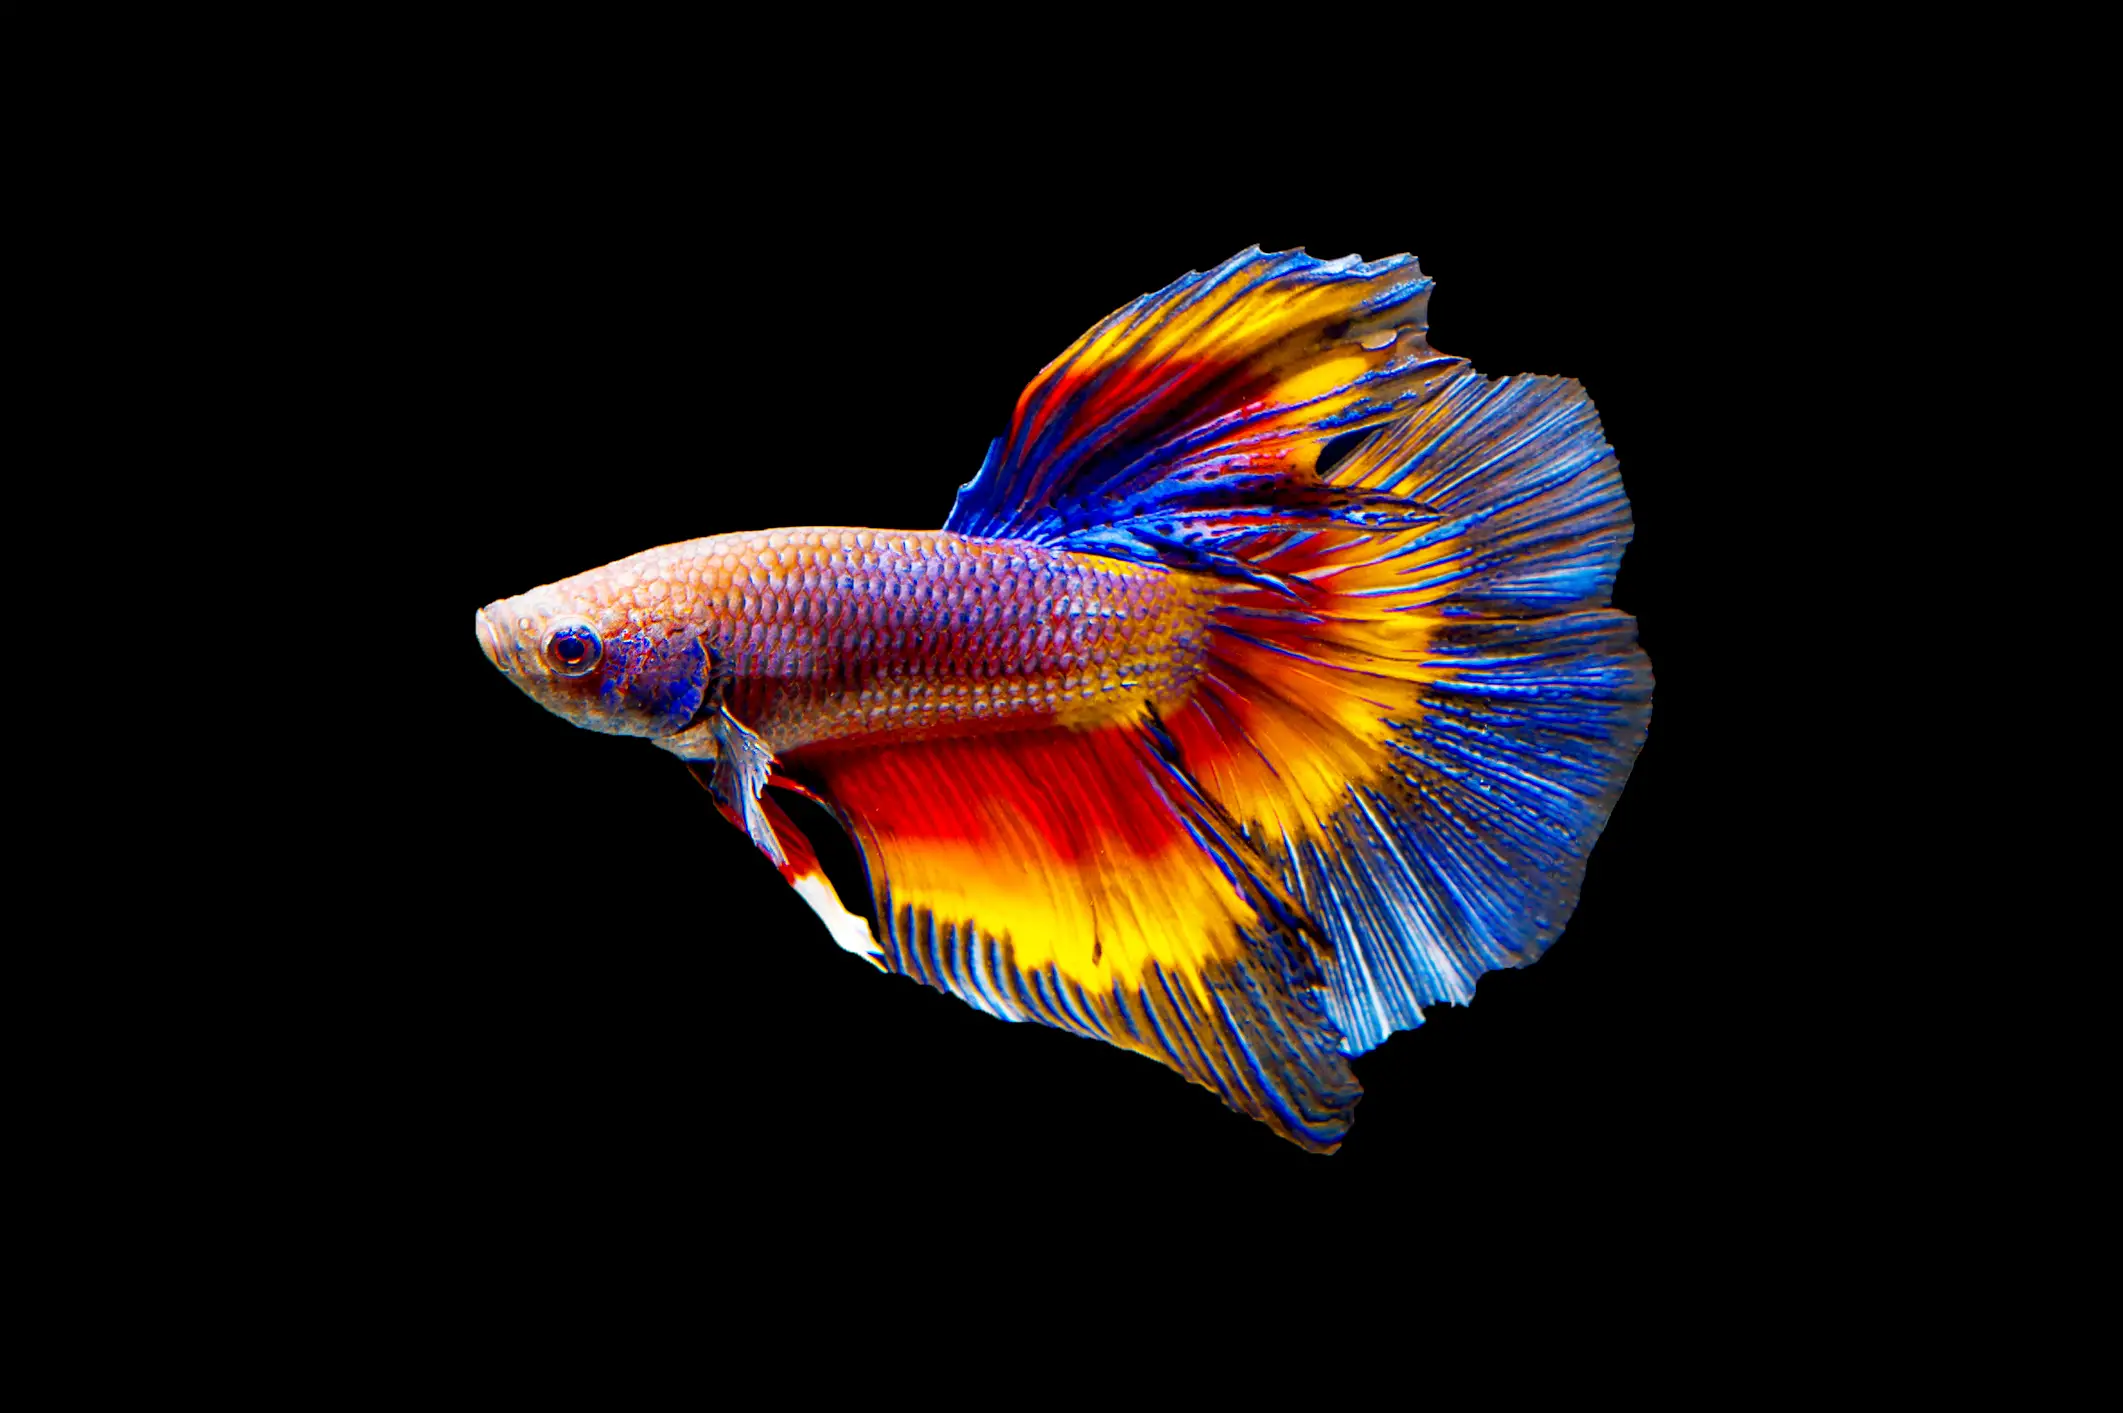 The Unique and Fascinating Fantail Variety Betta Fish